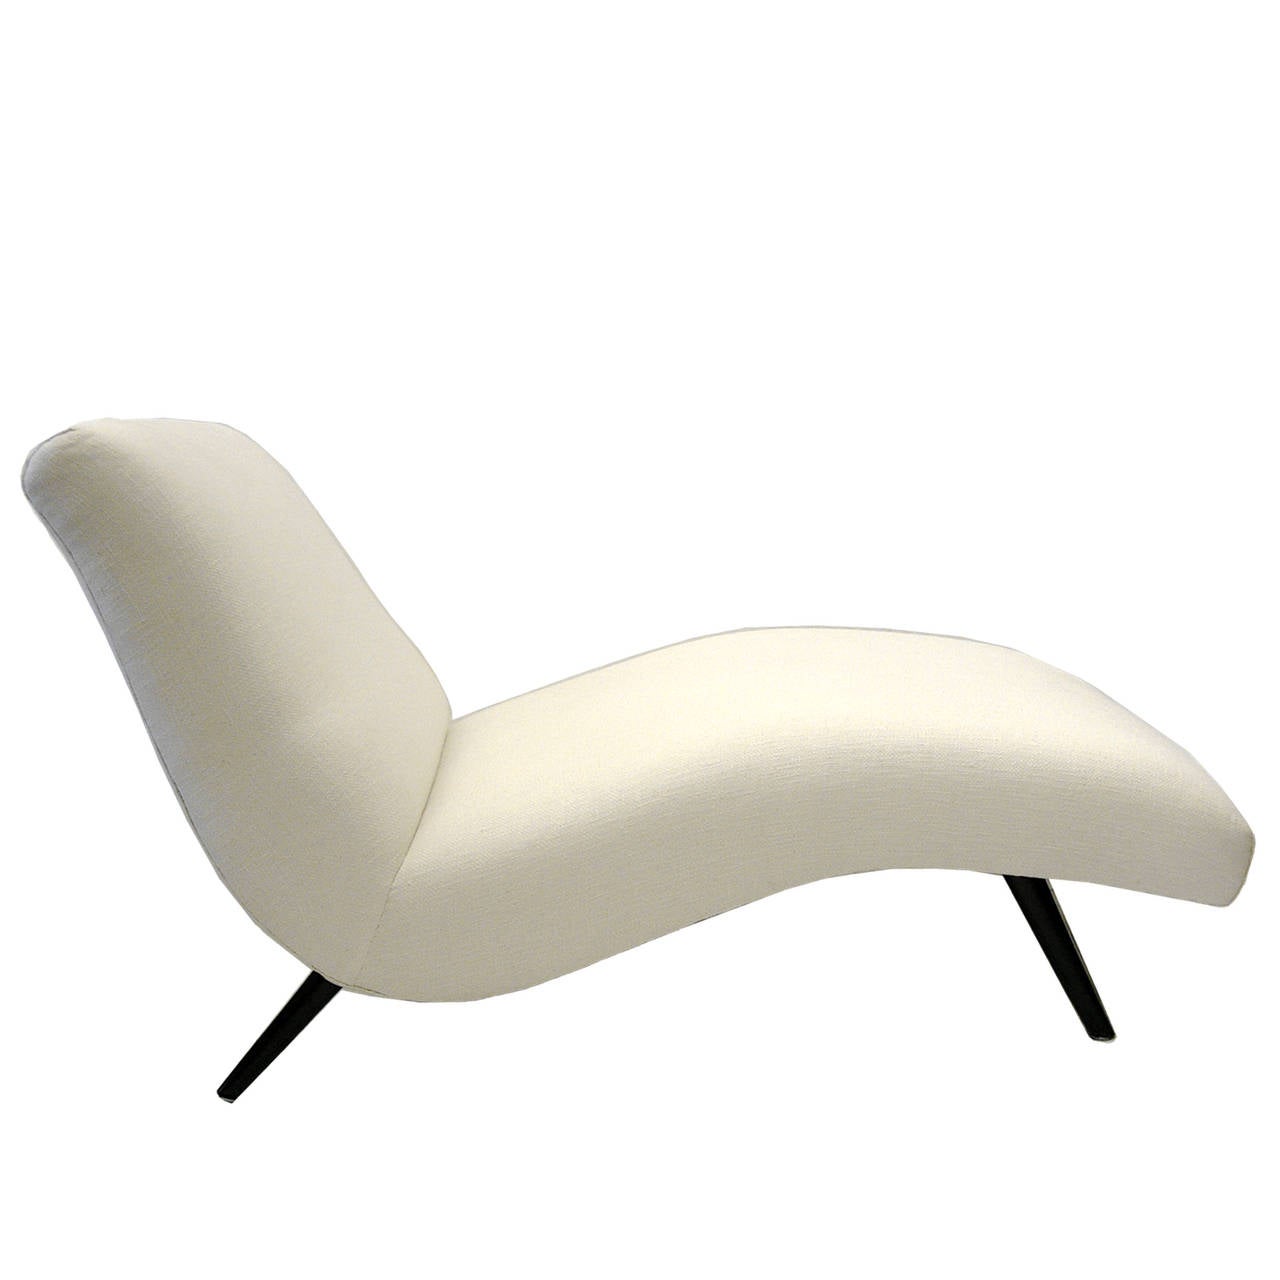 Freshly upholstered 1960s chaise longue. Redone in a soft white cotton weave upholstery. Stunning statement piece.